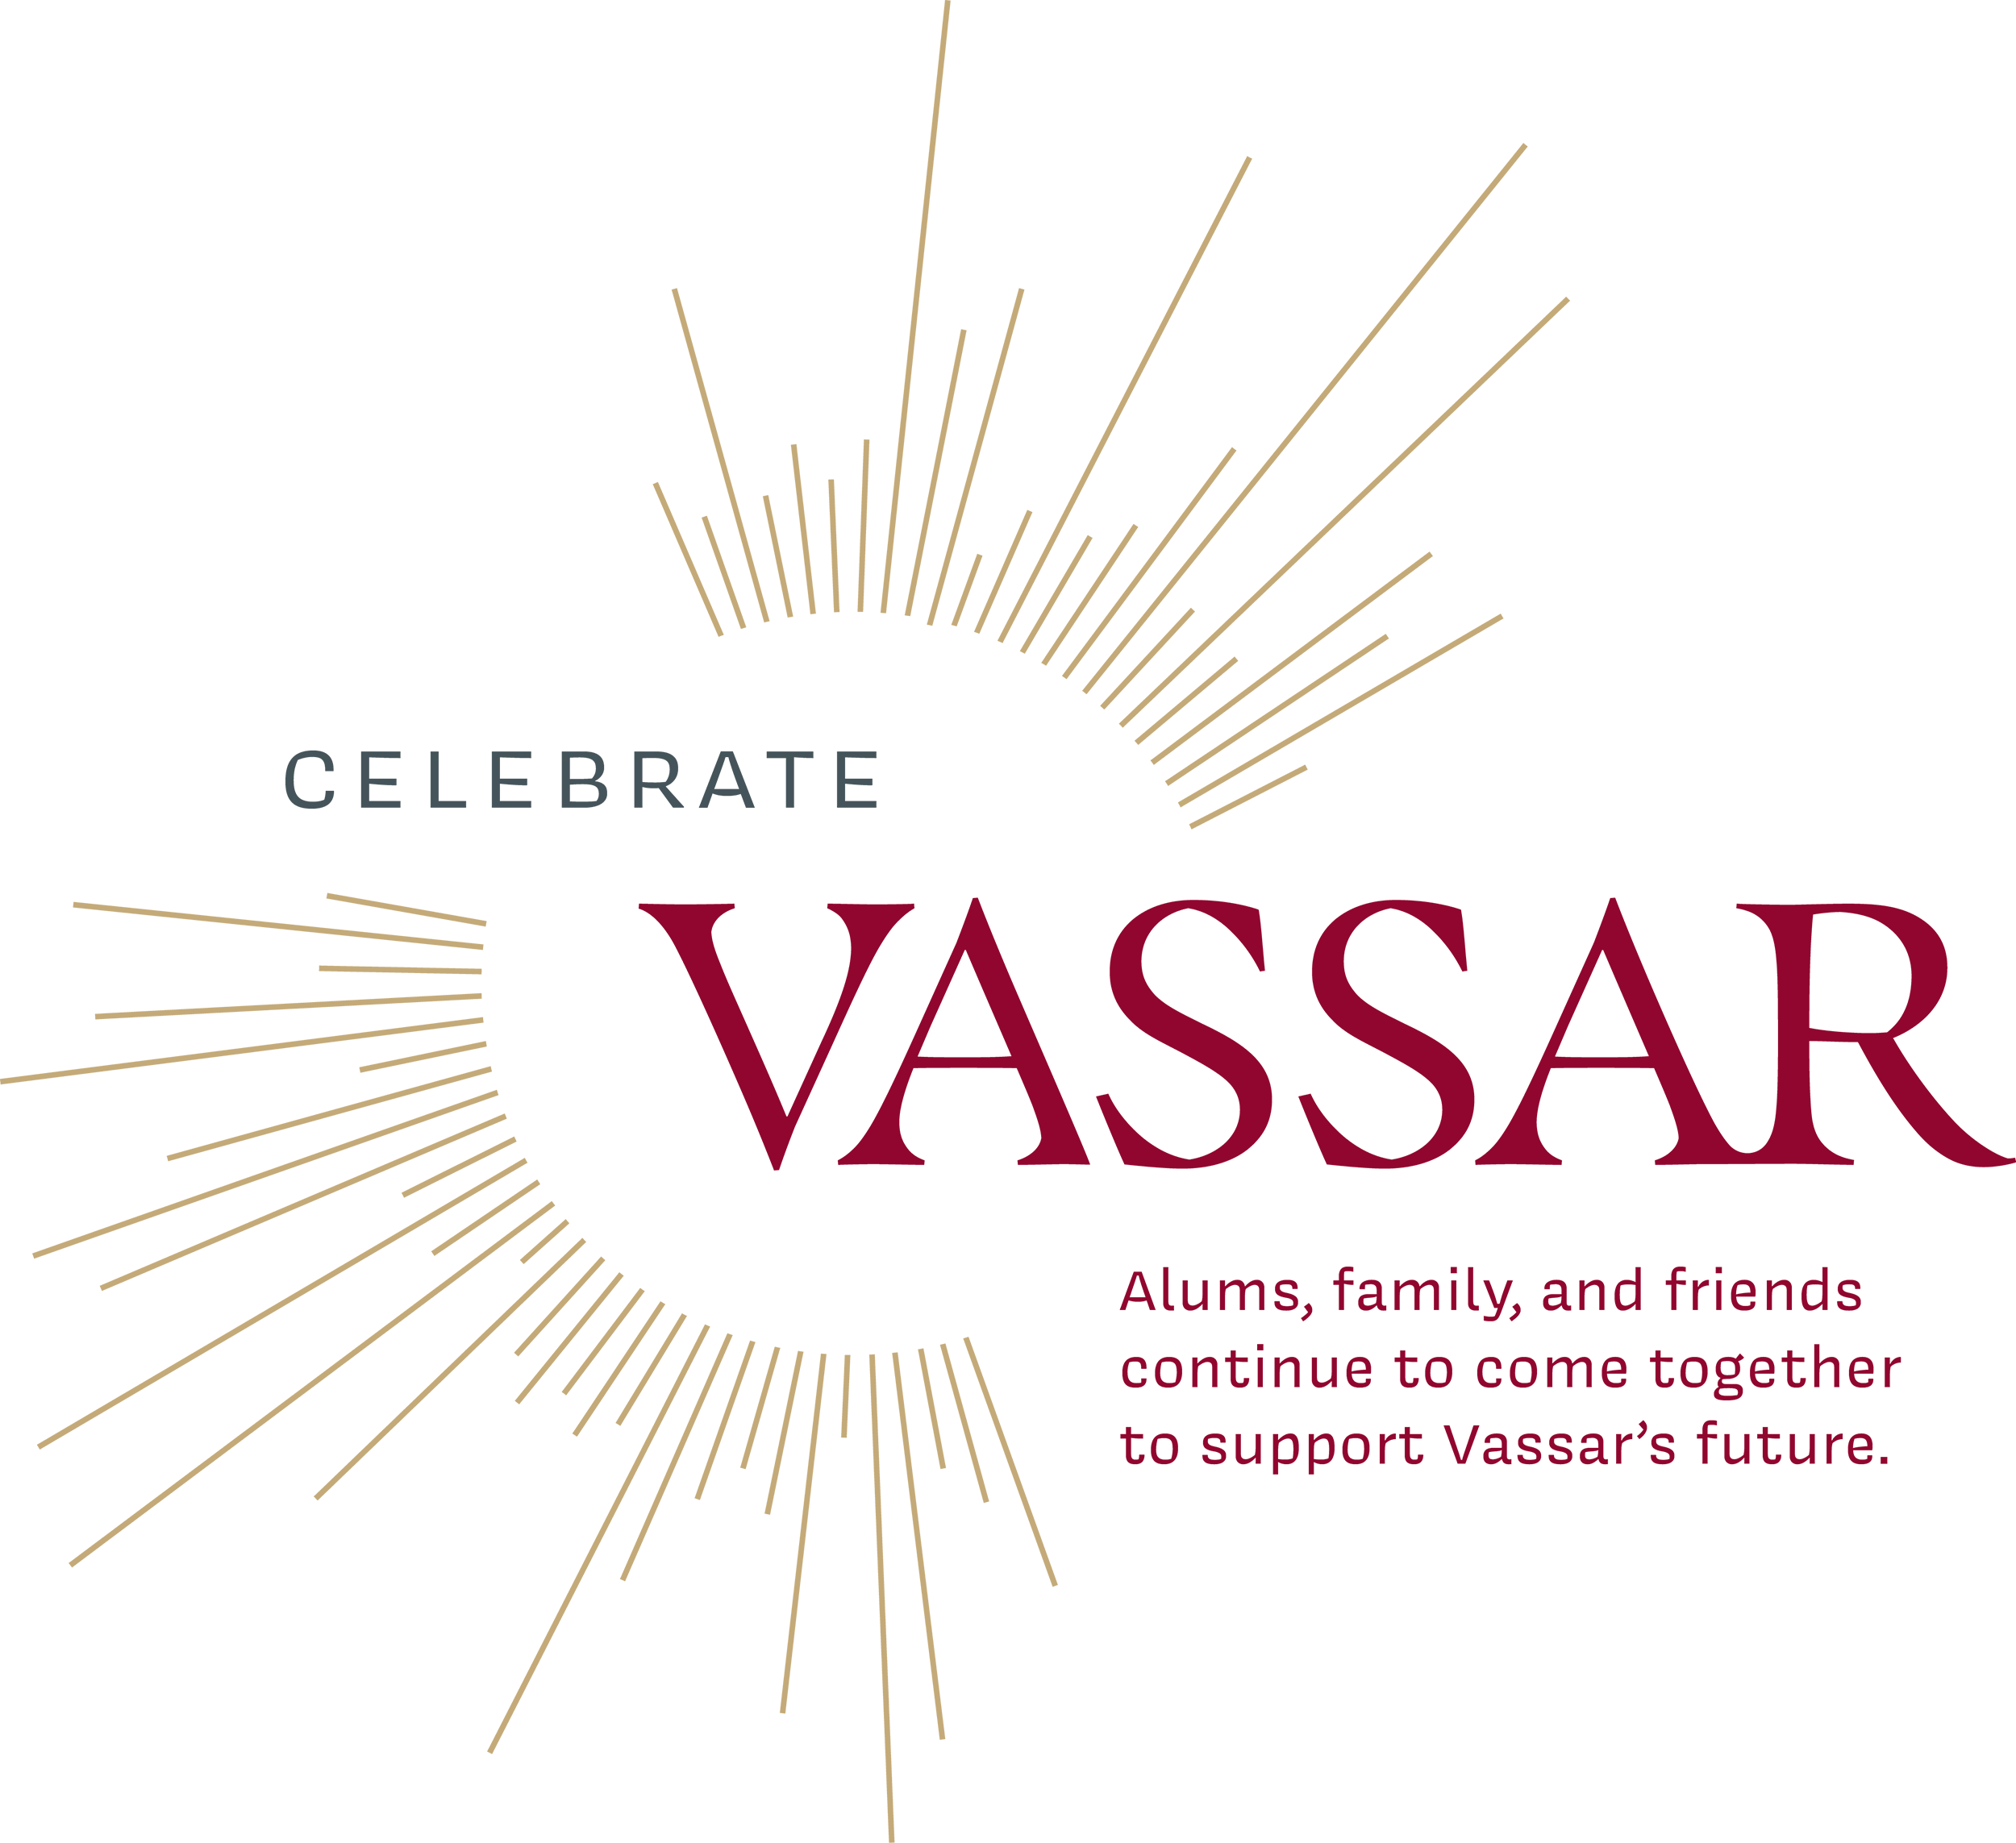 Celebrate Vassar: Alums, family, and friends continue to come together to support Vassar’s future.